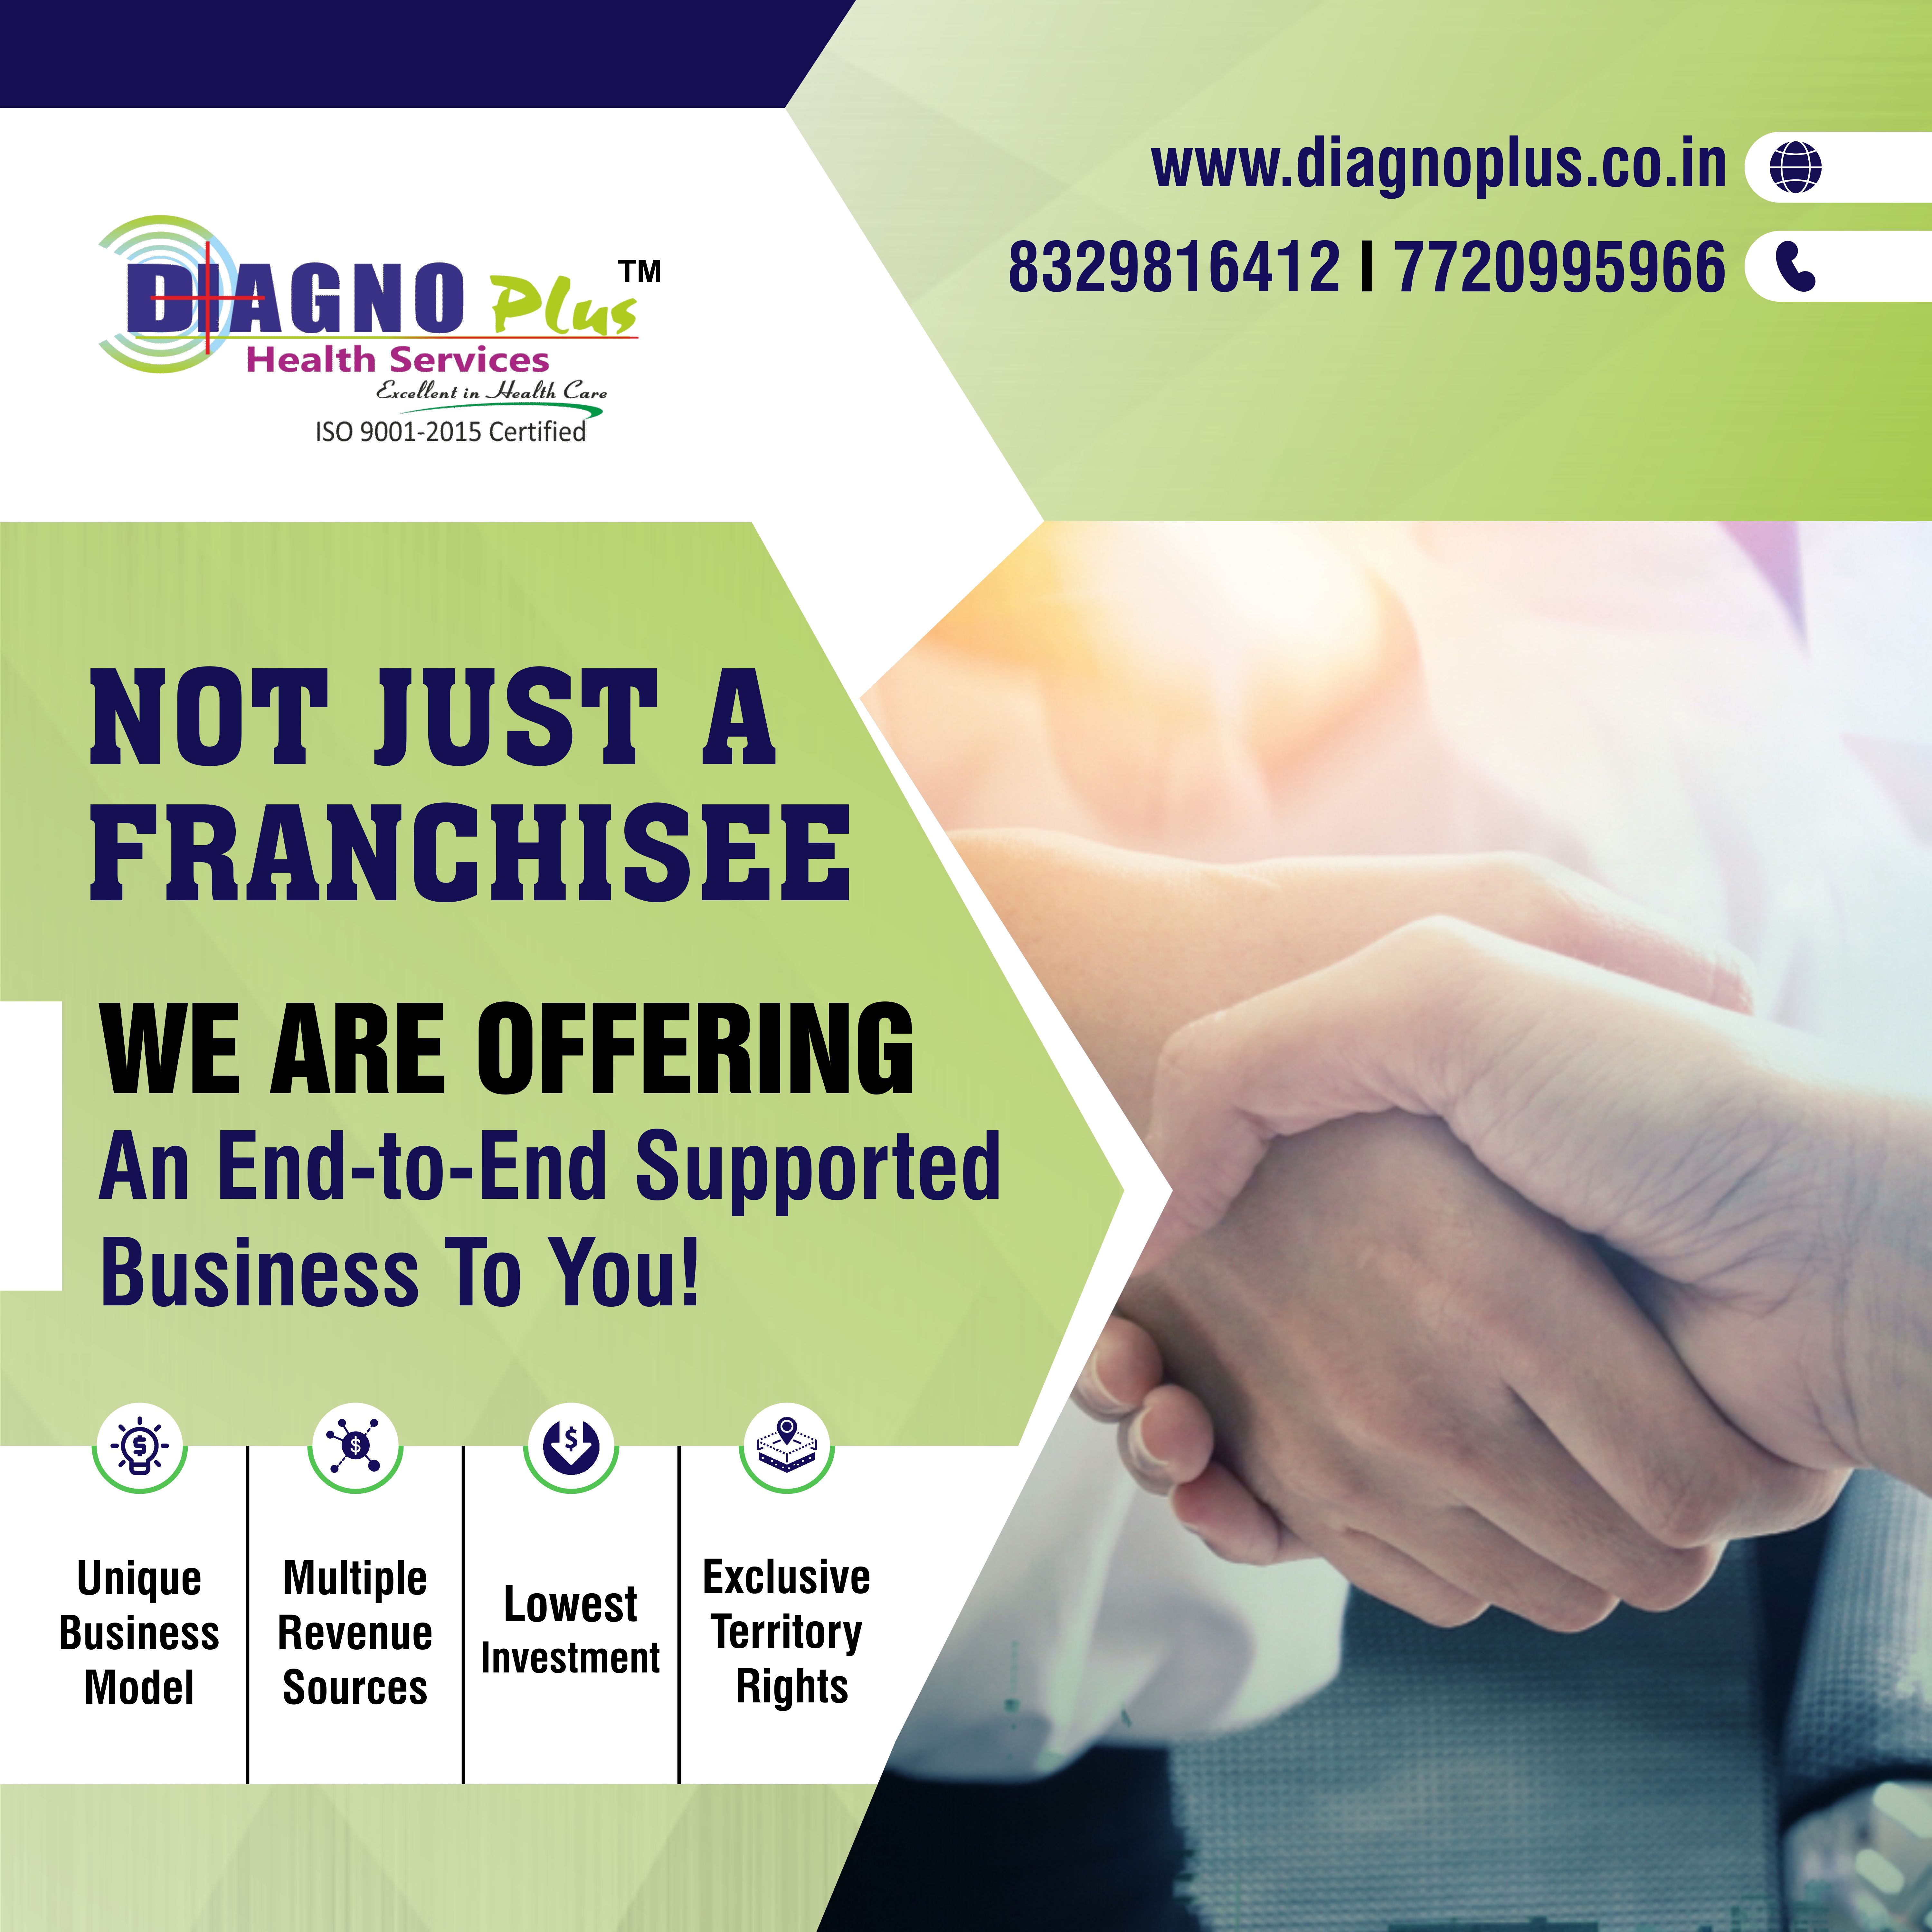 Franchisee service by Diagno plus